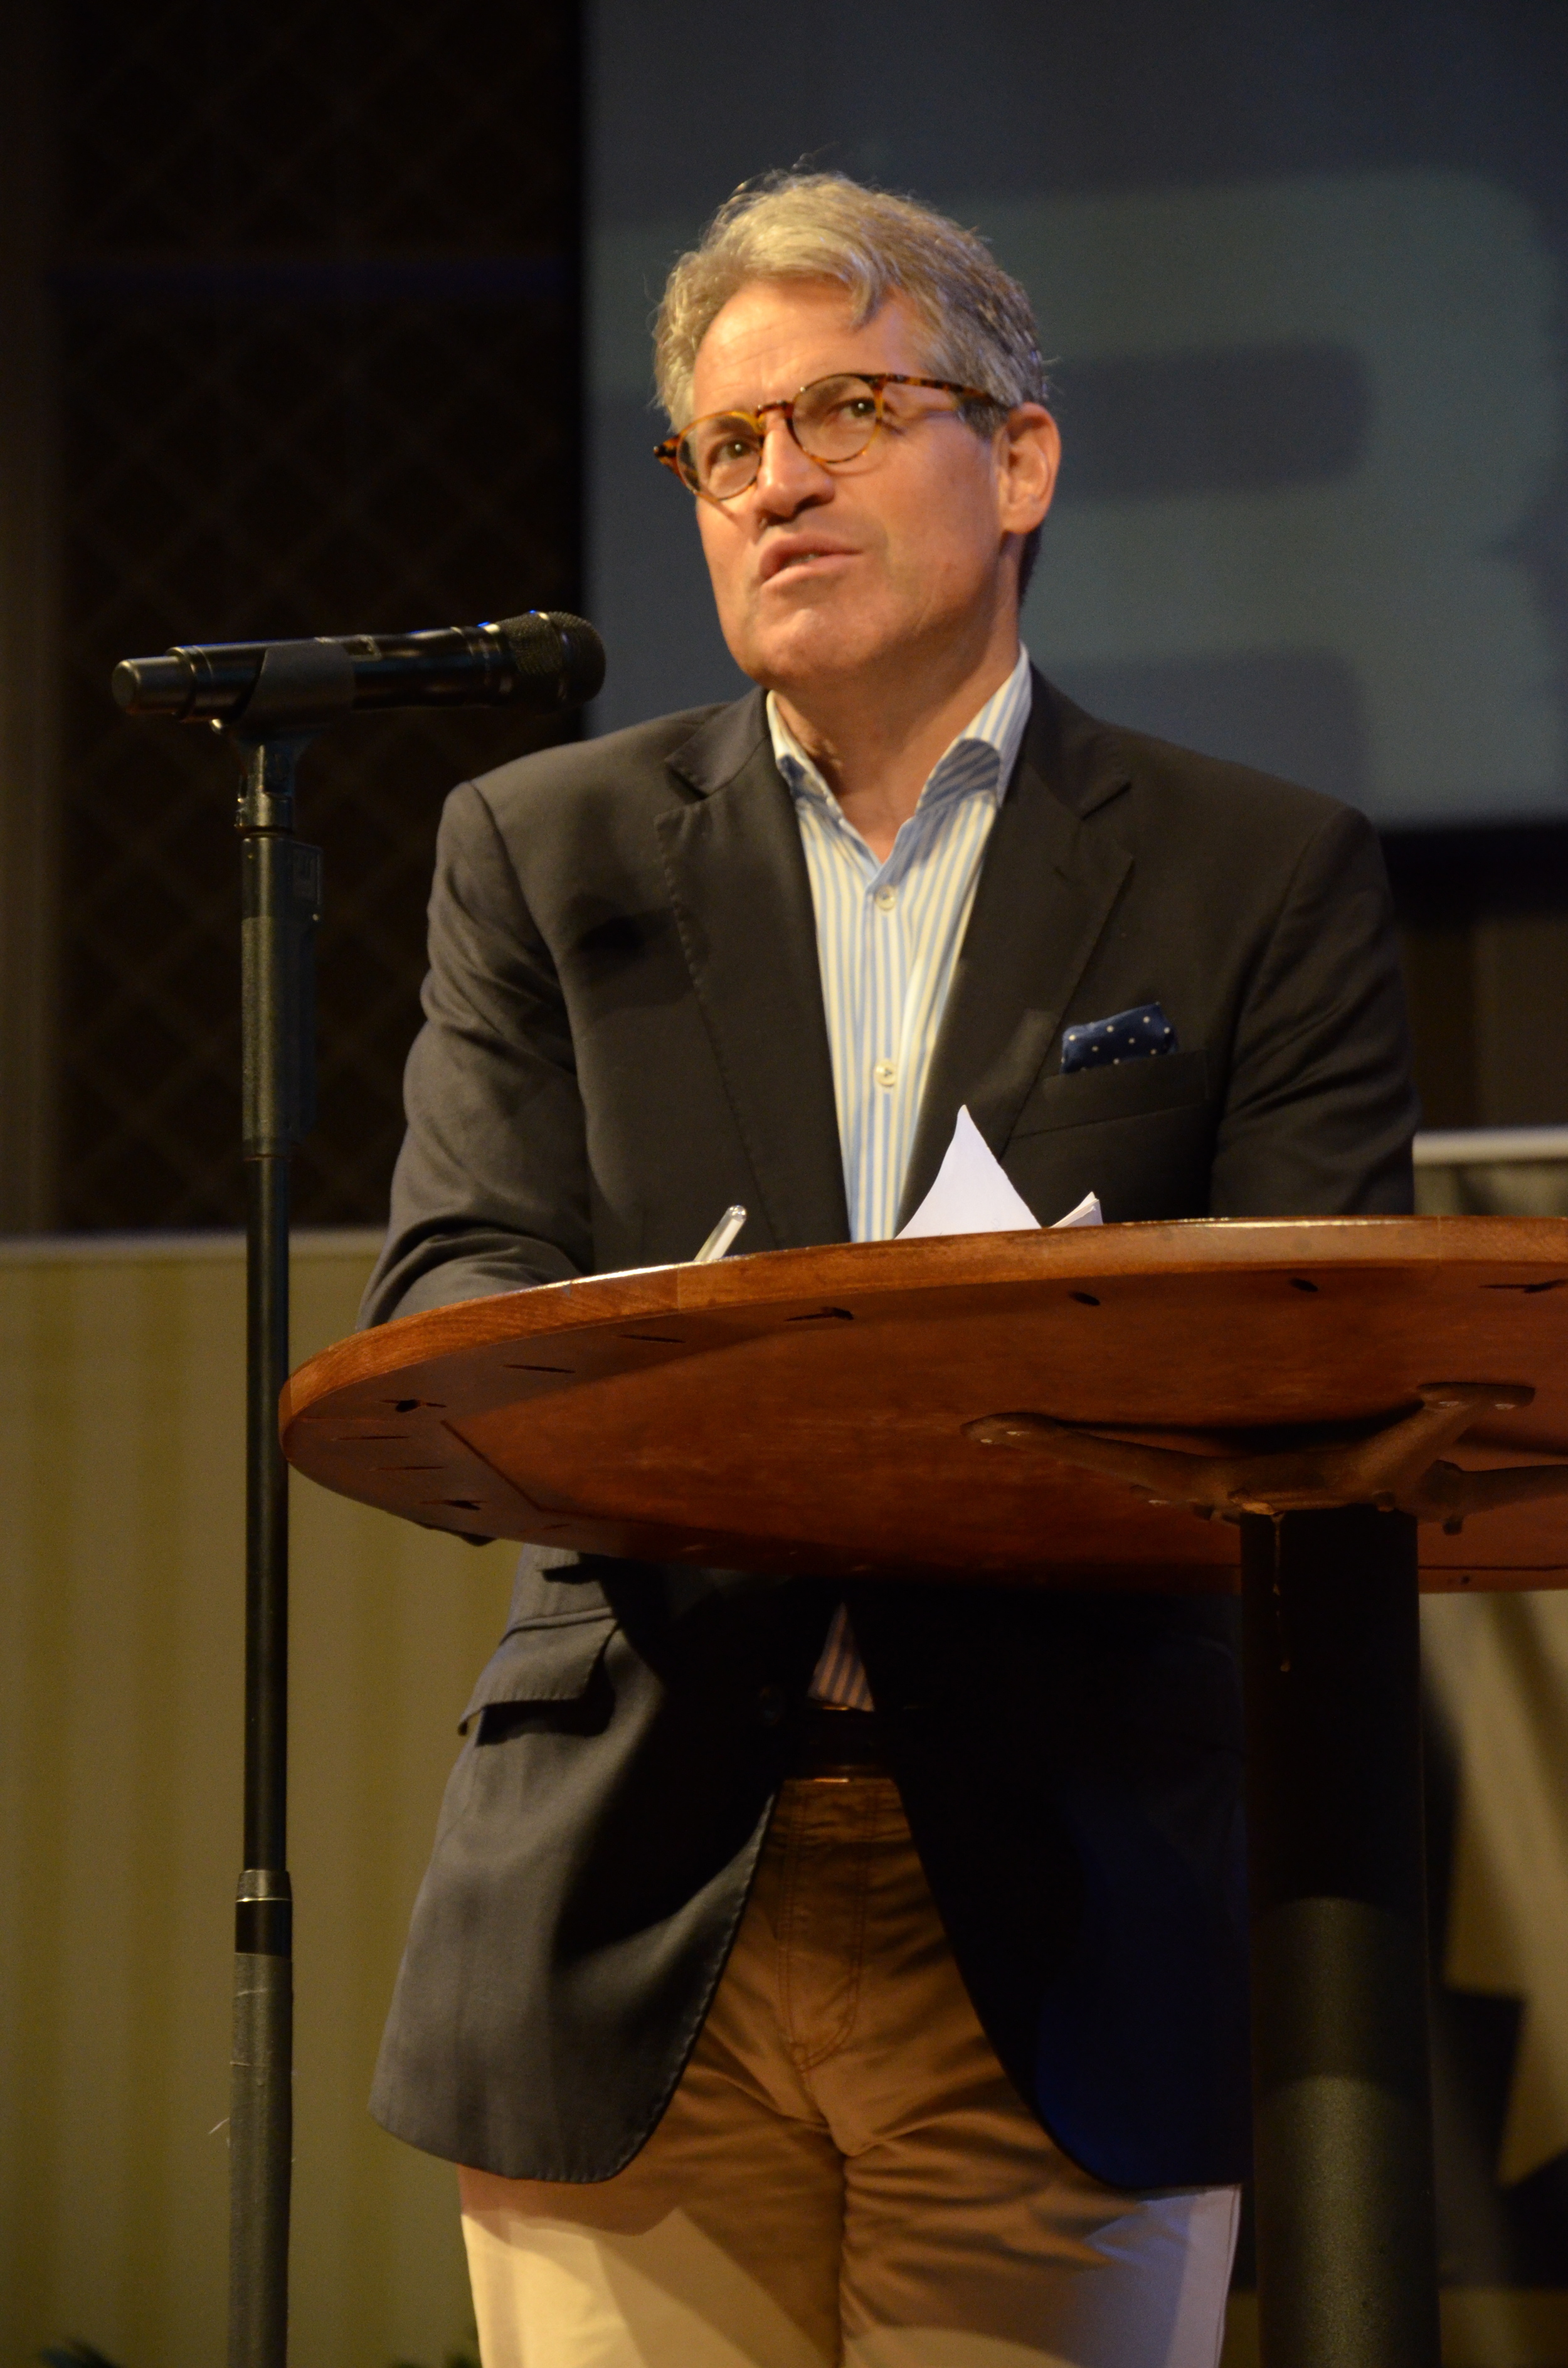  Eric Metaxas speaks on issues of faith at the Truth for a New Generation conference September 5-6 